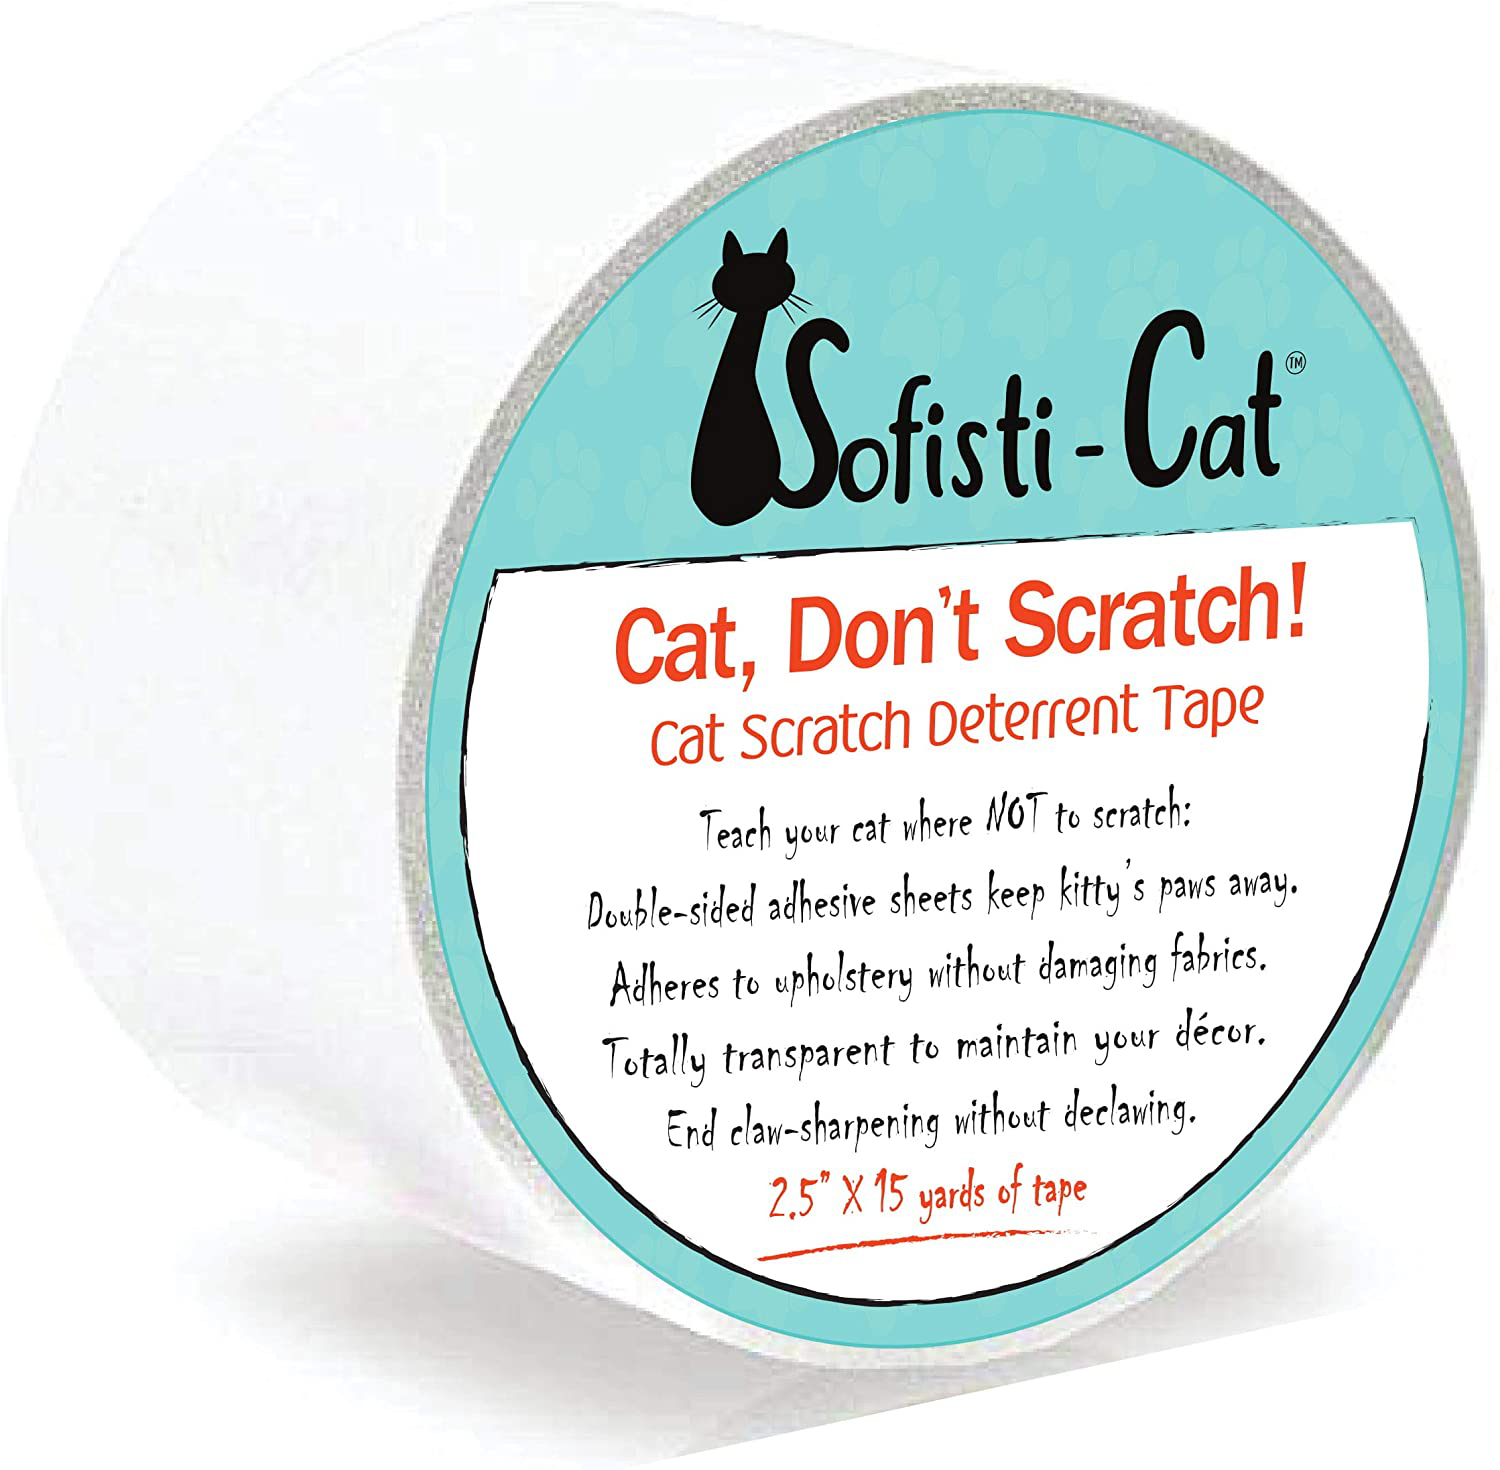 Cat Scratch Deterrent Tape,Anti Scratching Protection Tape,Furniture Protectors from Cats,Clear Double Sided Training Tape, Thebest Choice to